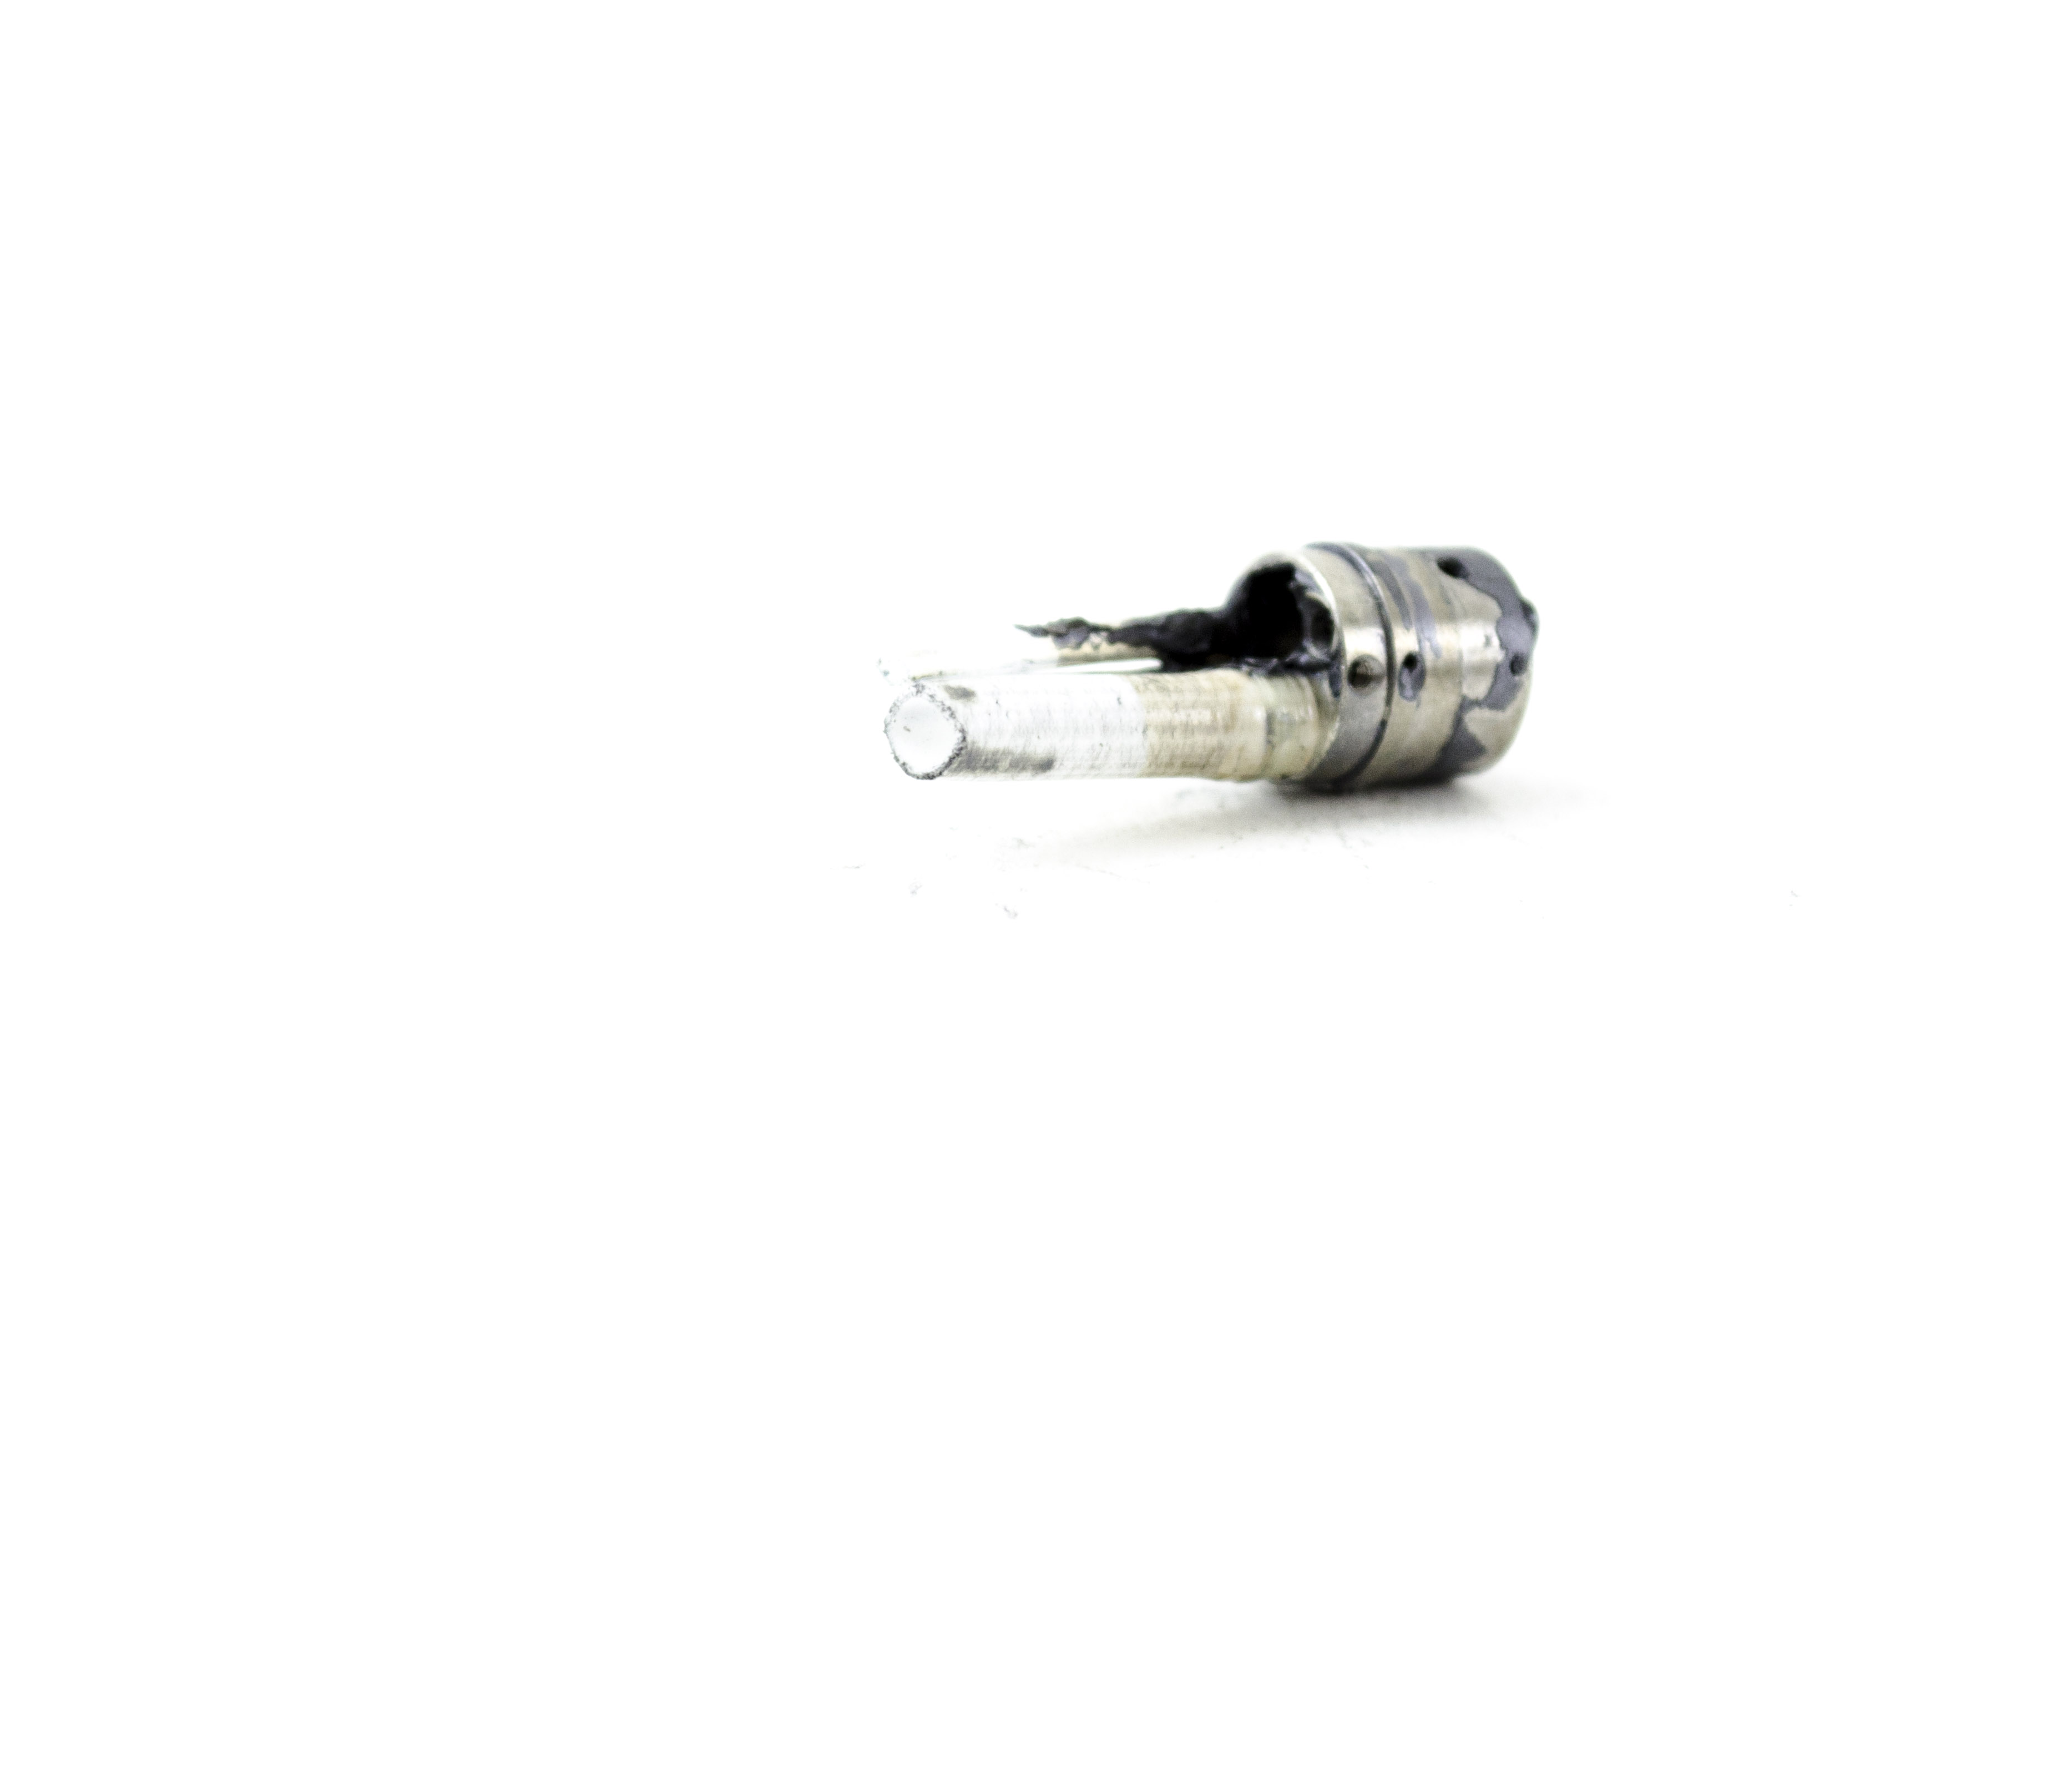 OEM Distal Tip with Lenses - PCF-H180AL, PCF-H180AI